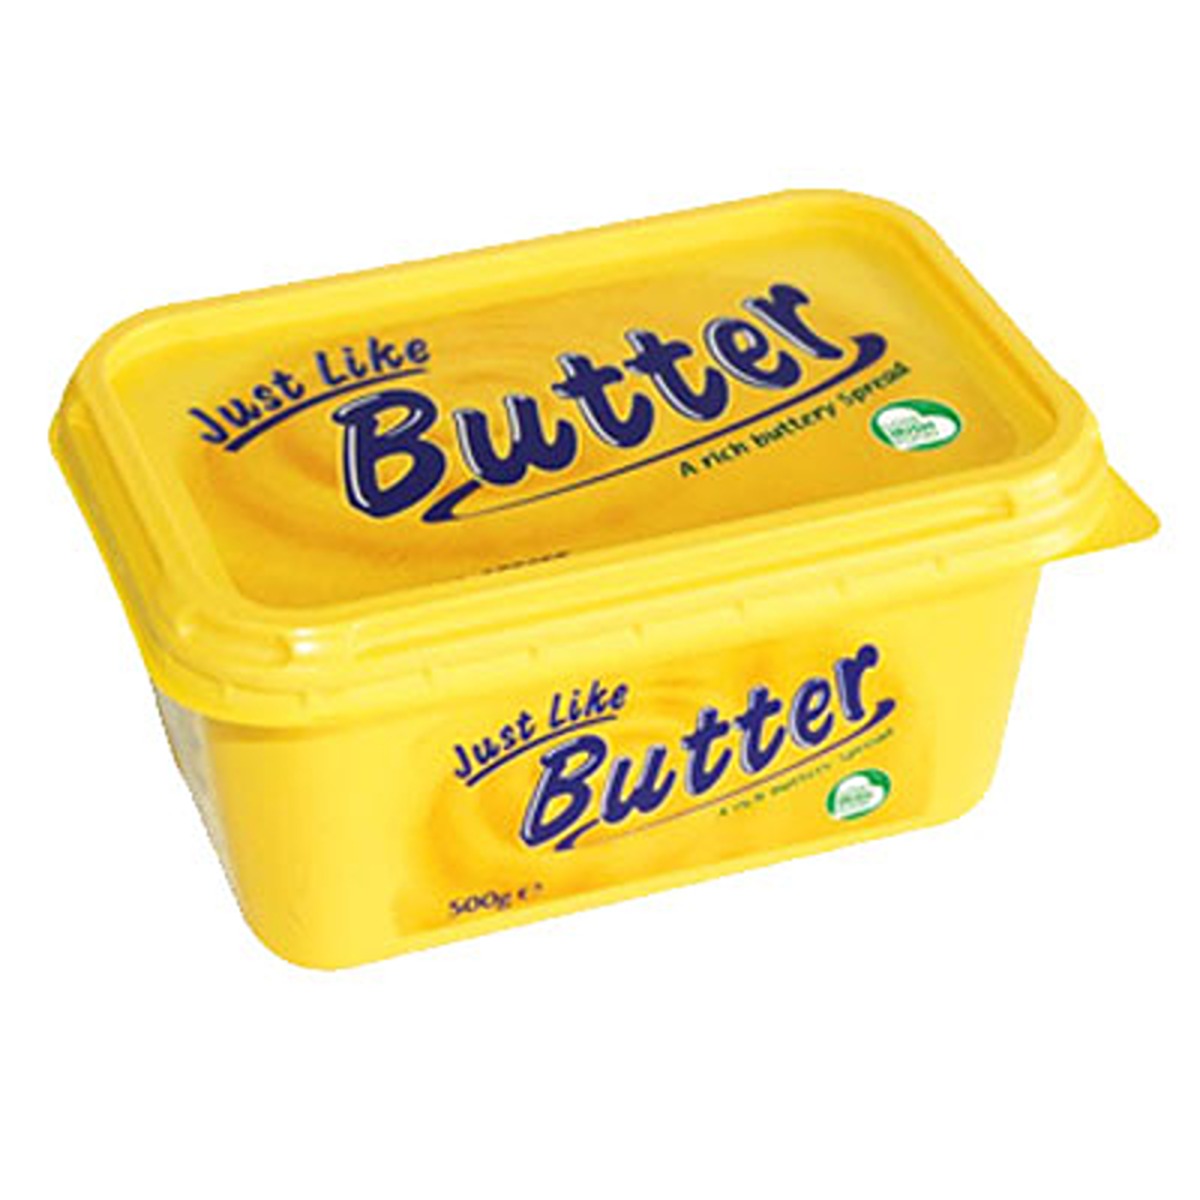 Just Like Butter - Buttery Spread - 500g - Continental Food Store